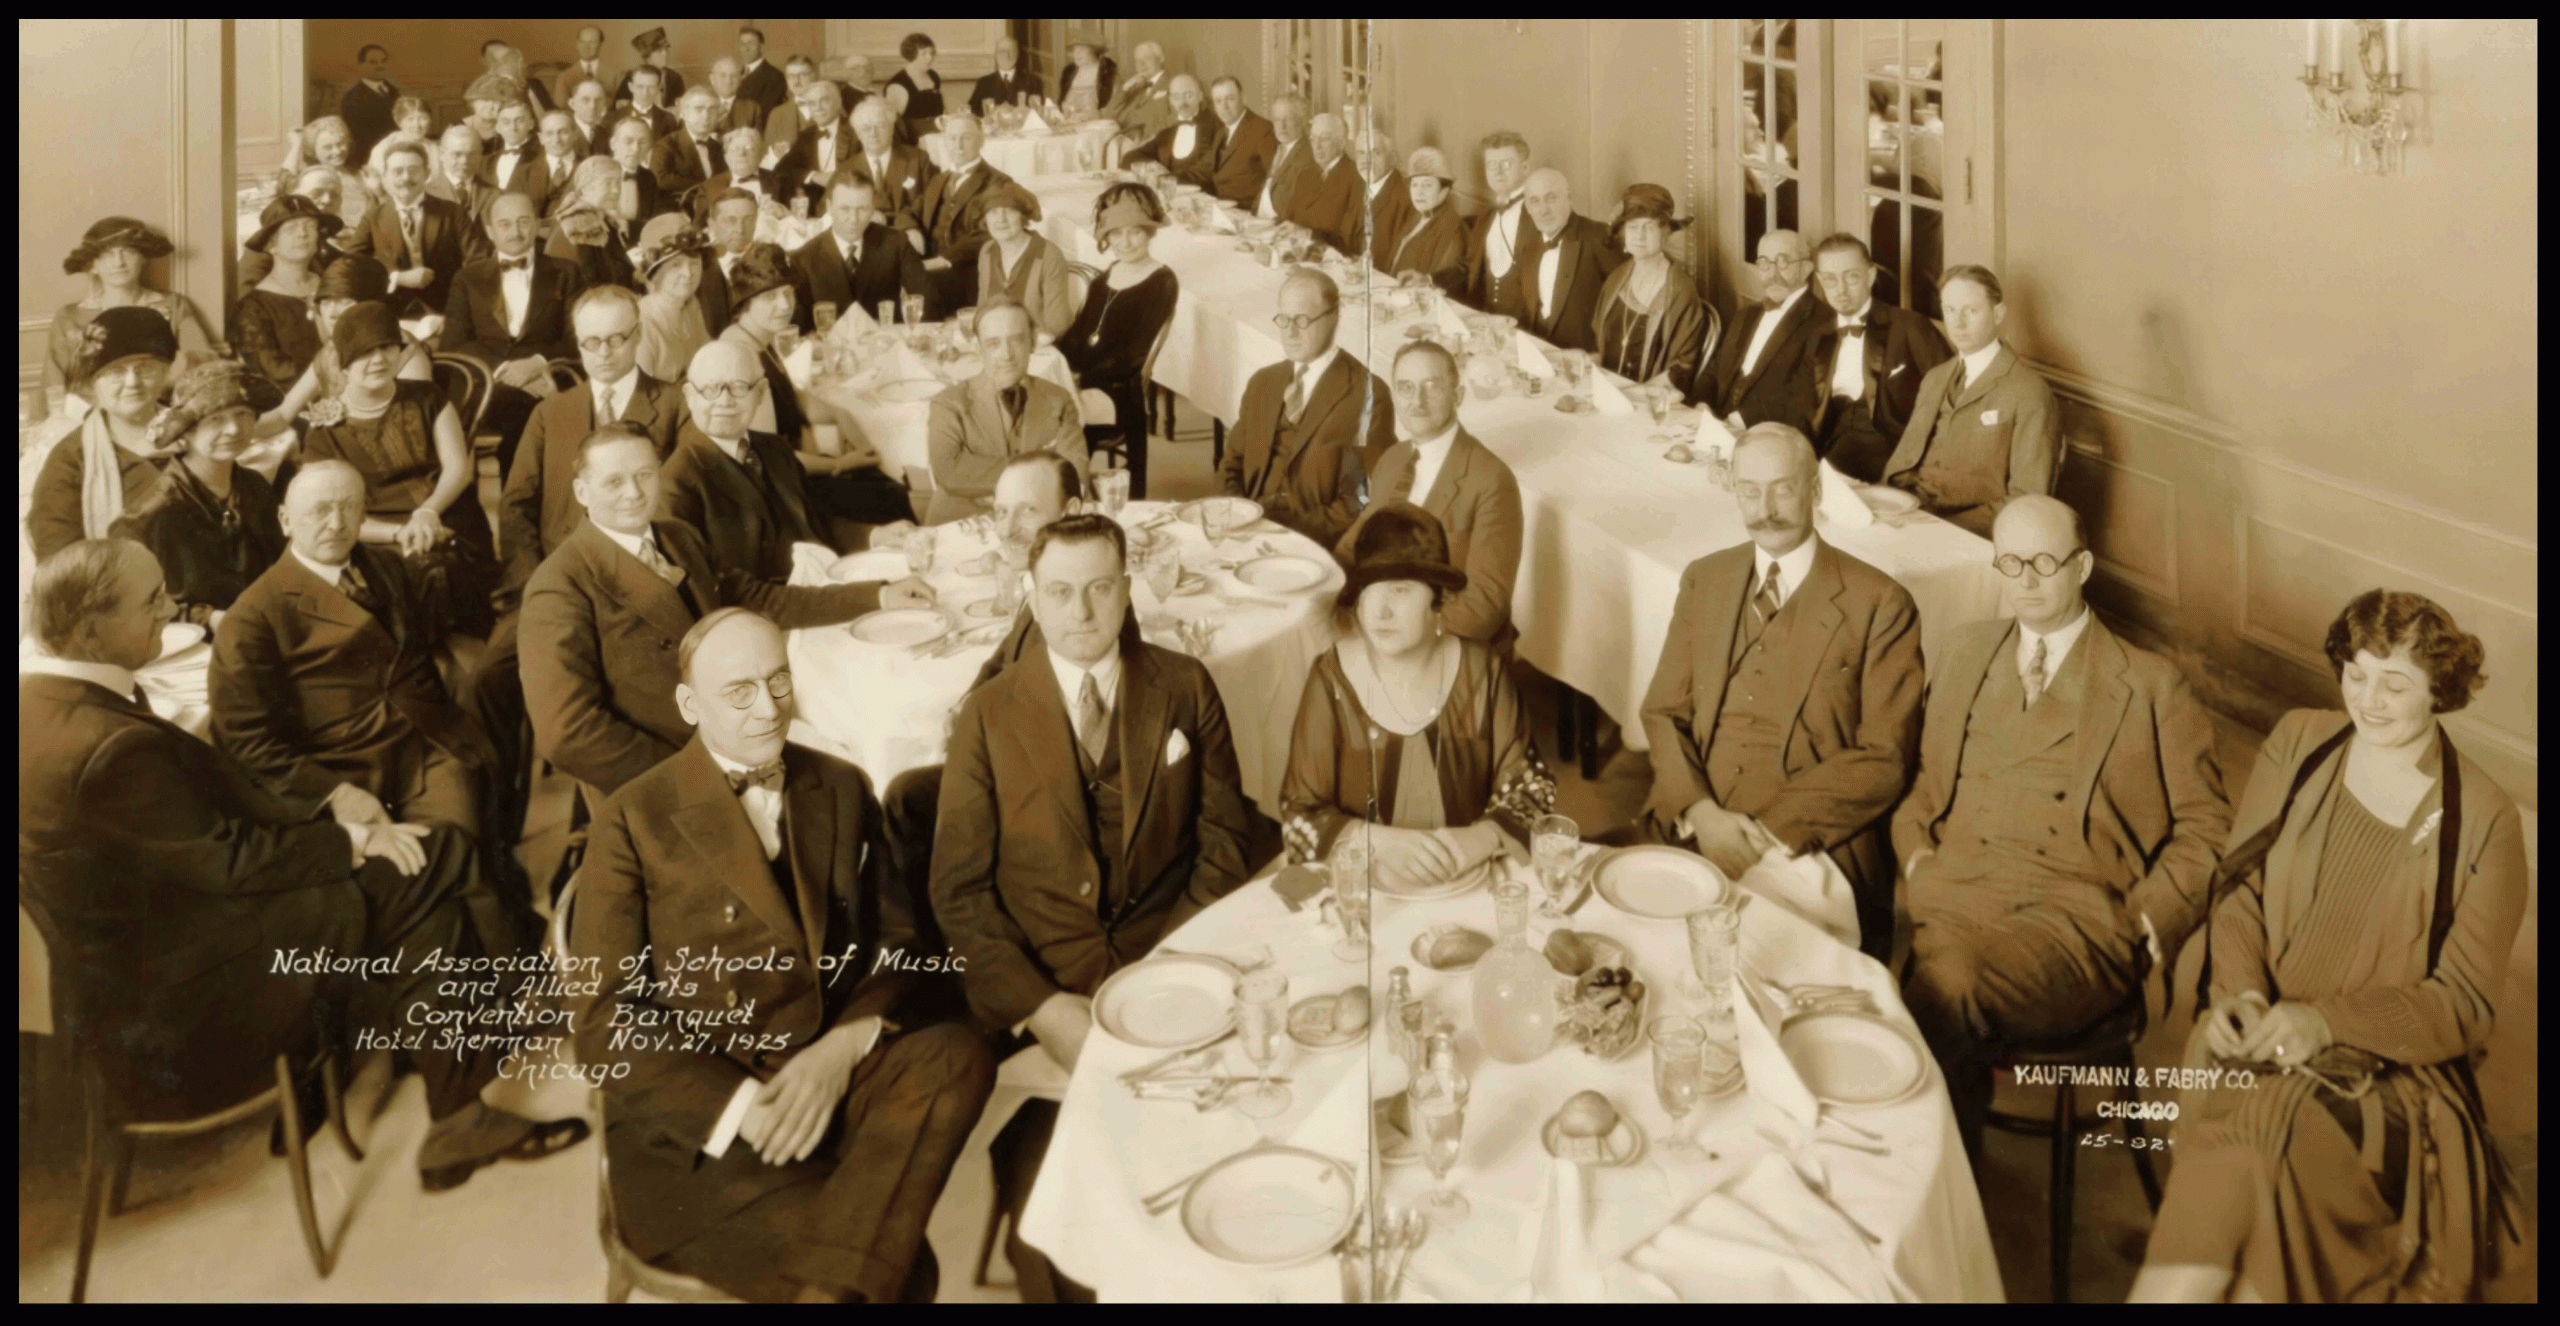 Meeting of the National Association of Schools of Music and Allied Arts Convention Banquet, Hotel Sherman, November 27, 1925, Chicago. Sepia photo of approximately 75 attendees sitting at banquet tables, facing the camera.